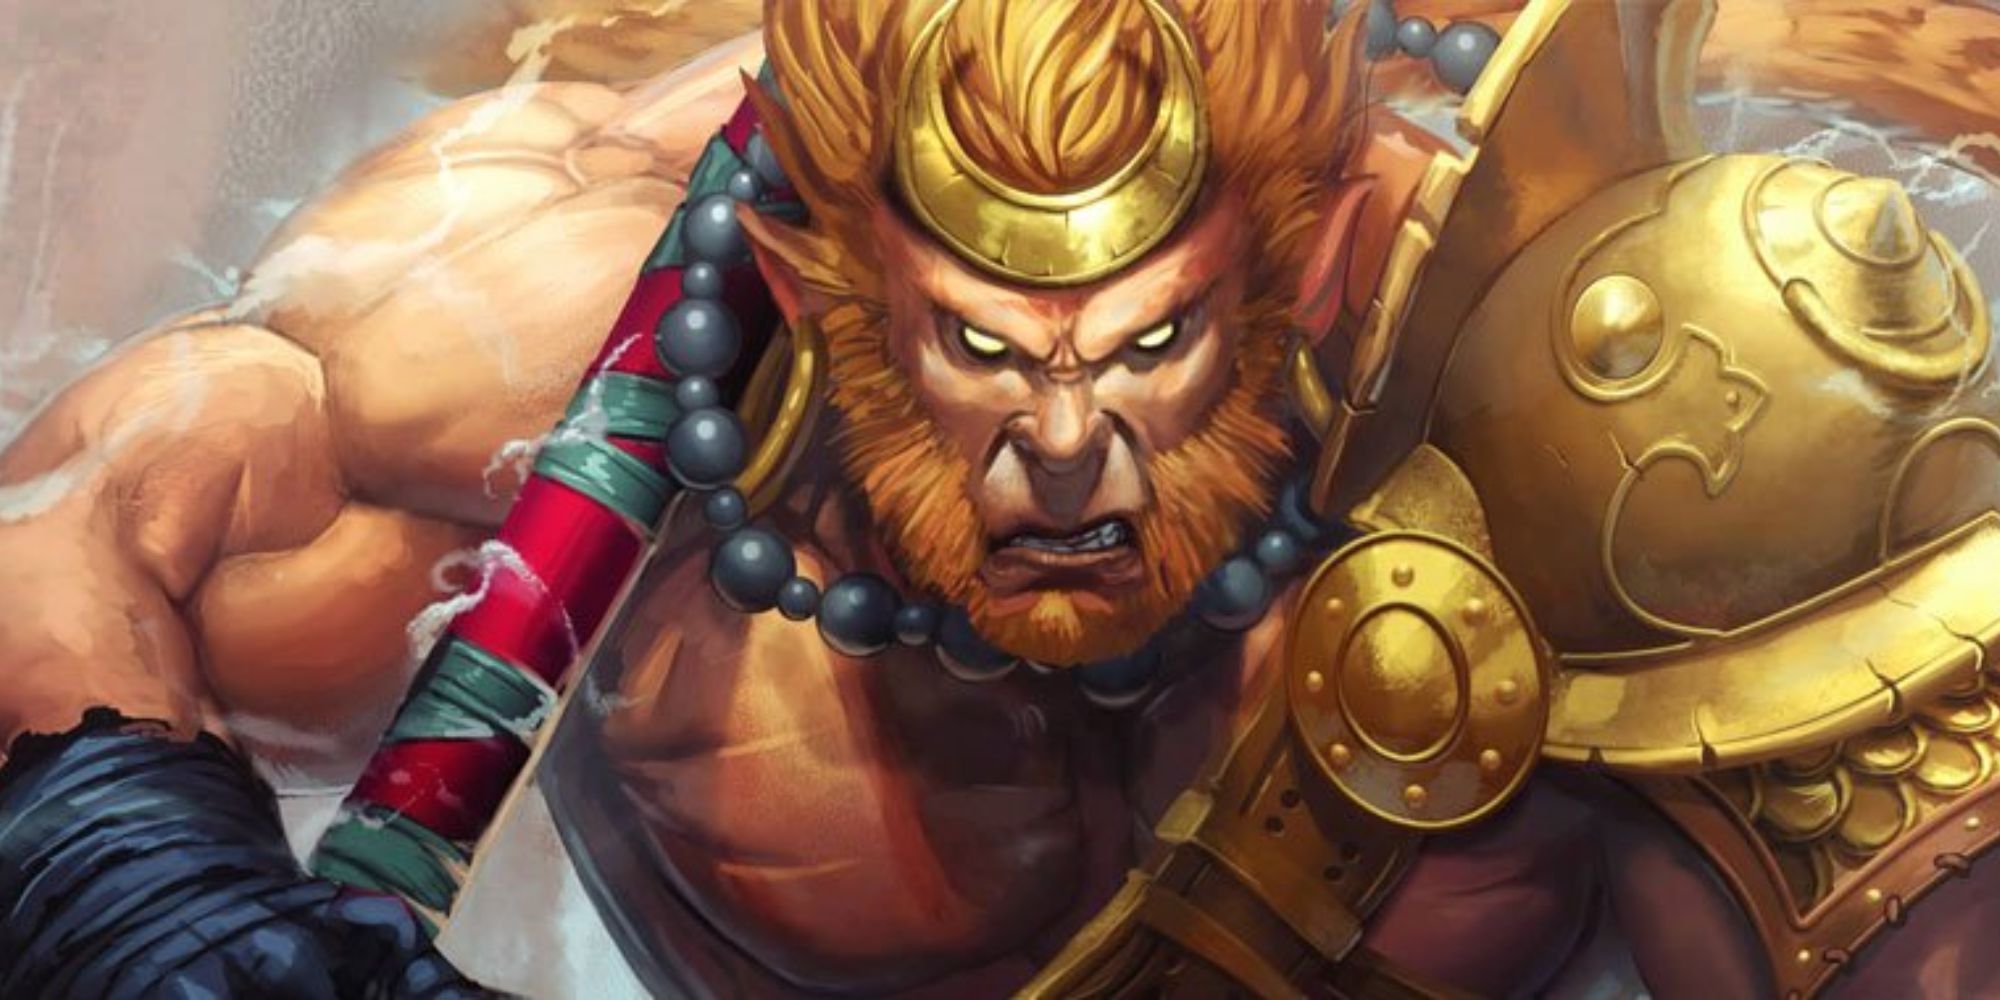 Sun-Wukong Smite god official art threatening pose weapon over shoulder.